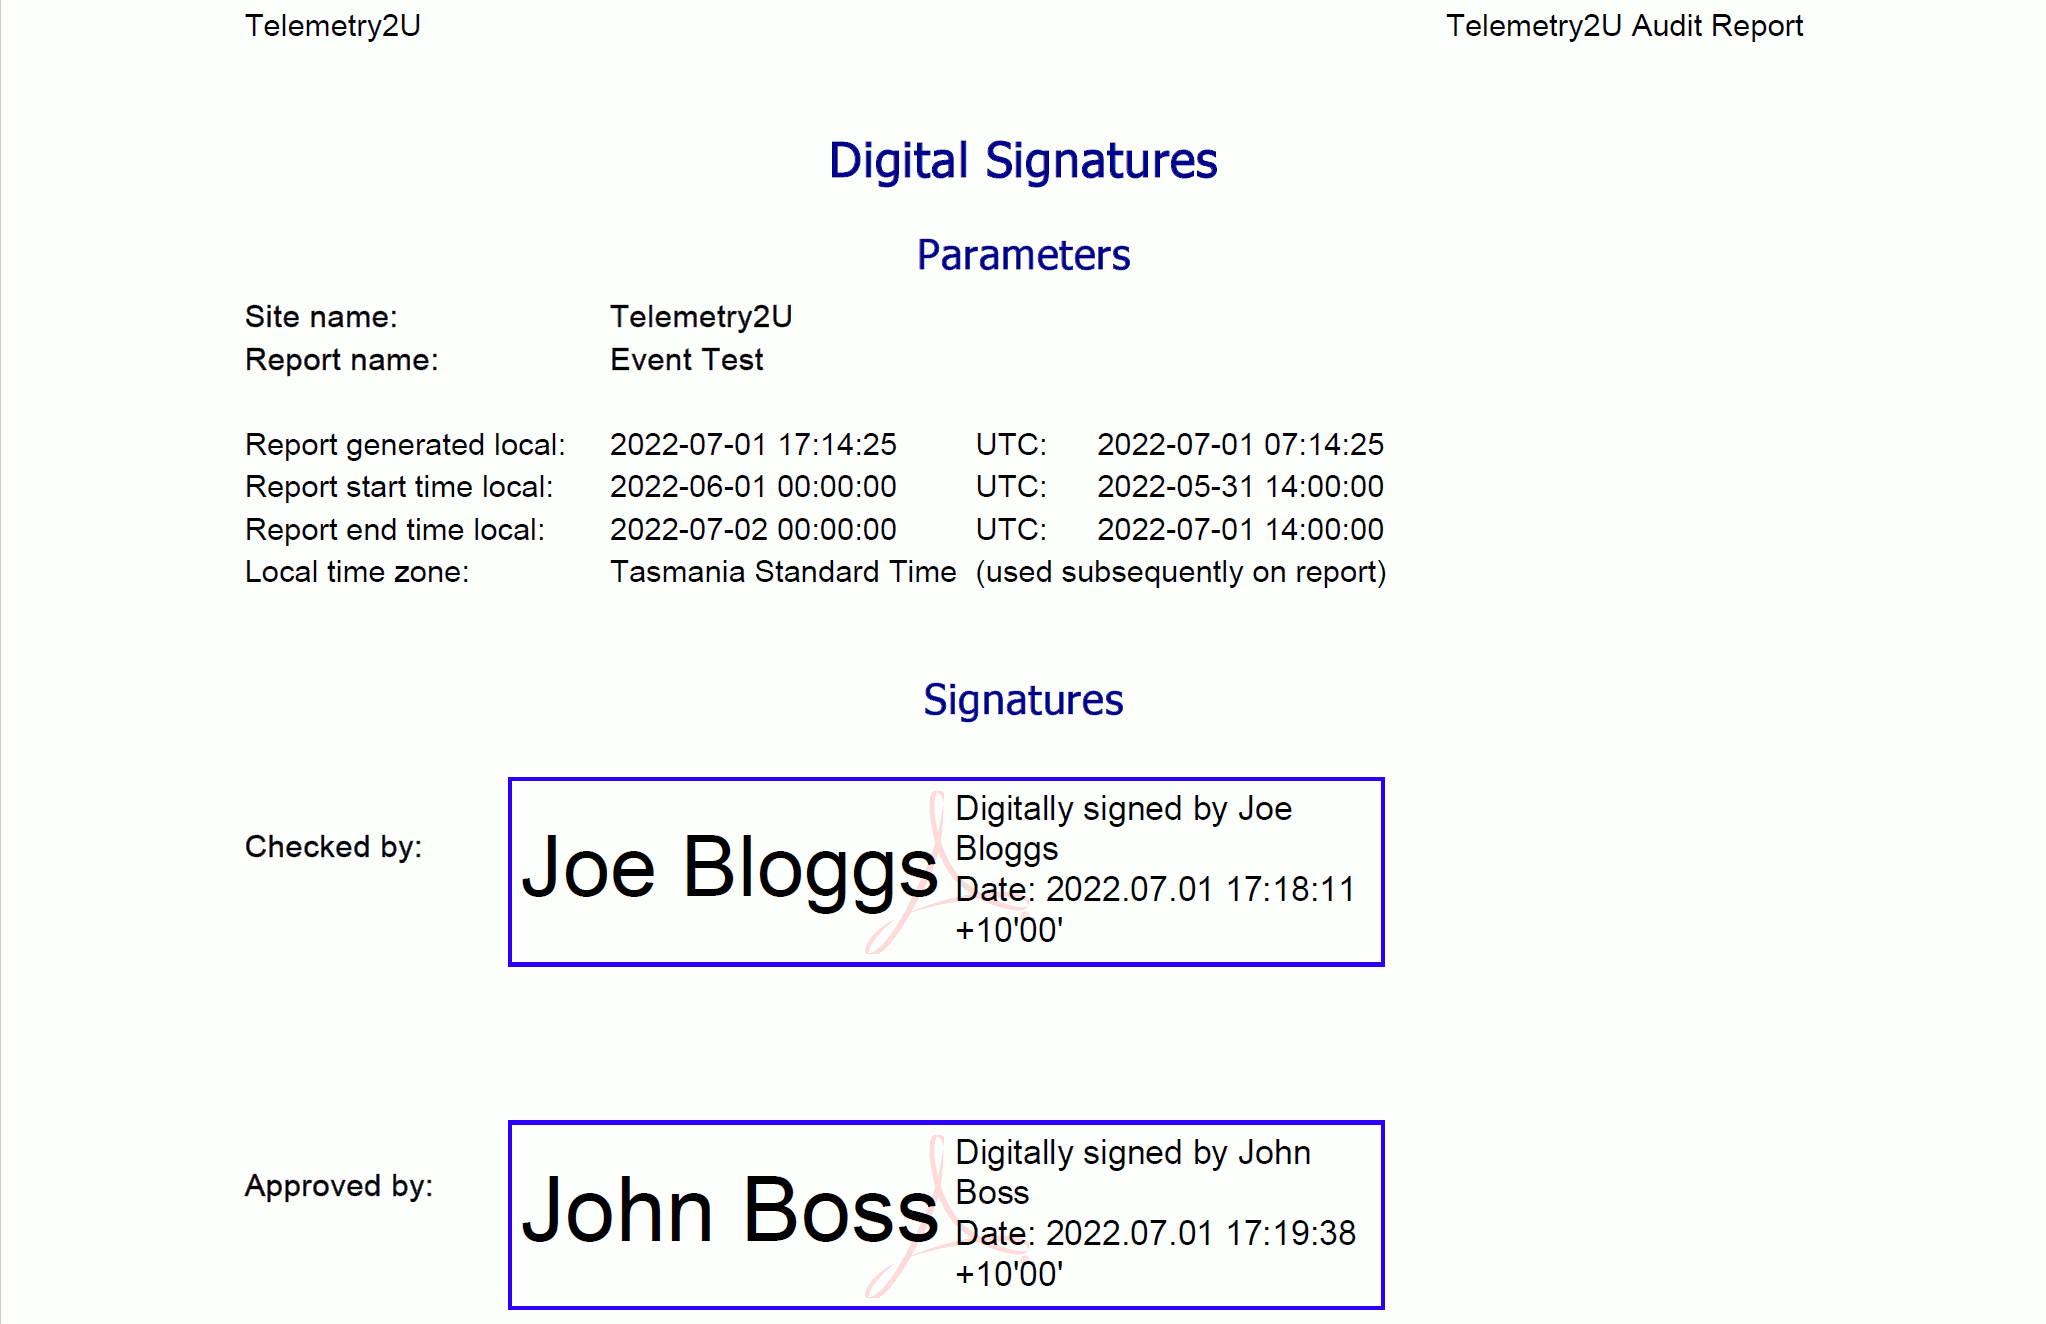 5.4 - Digitally Signing an Audit Report